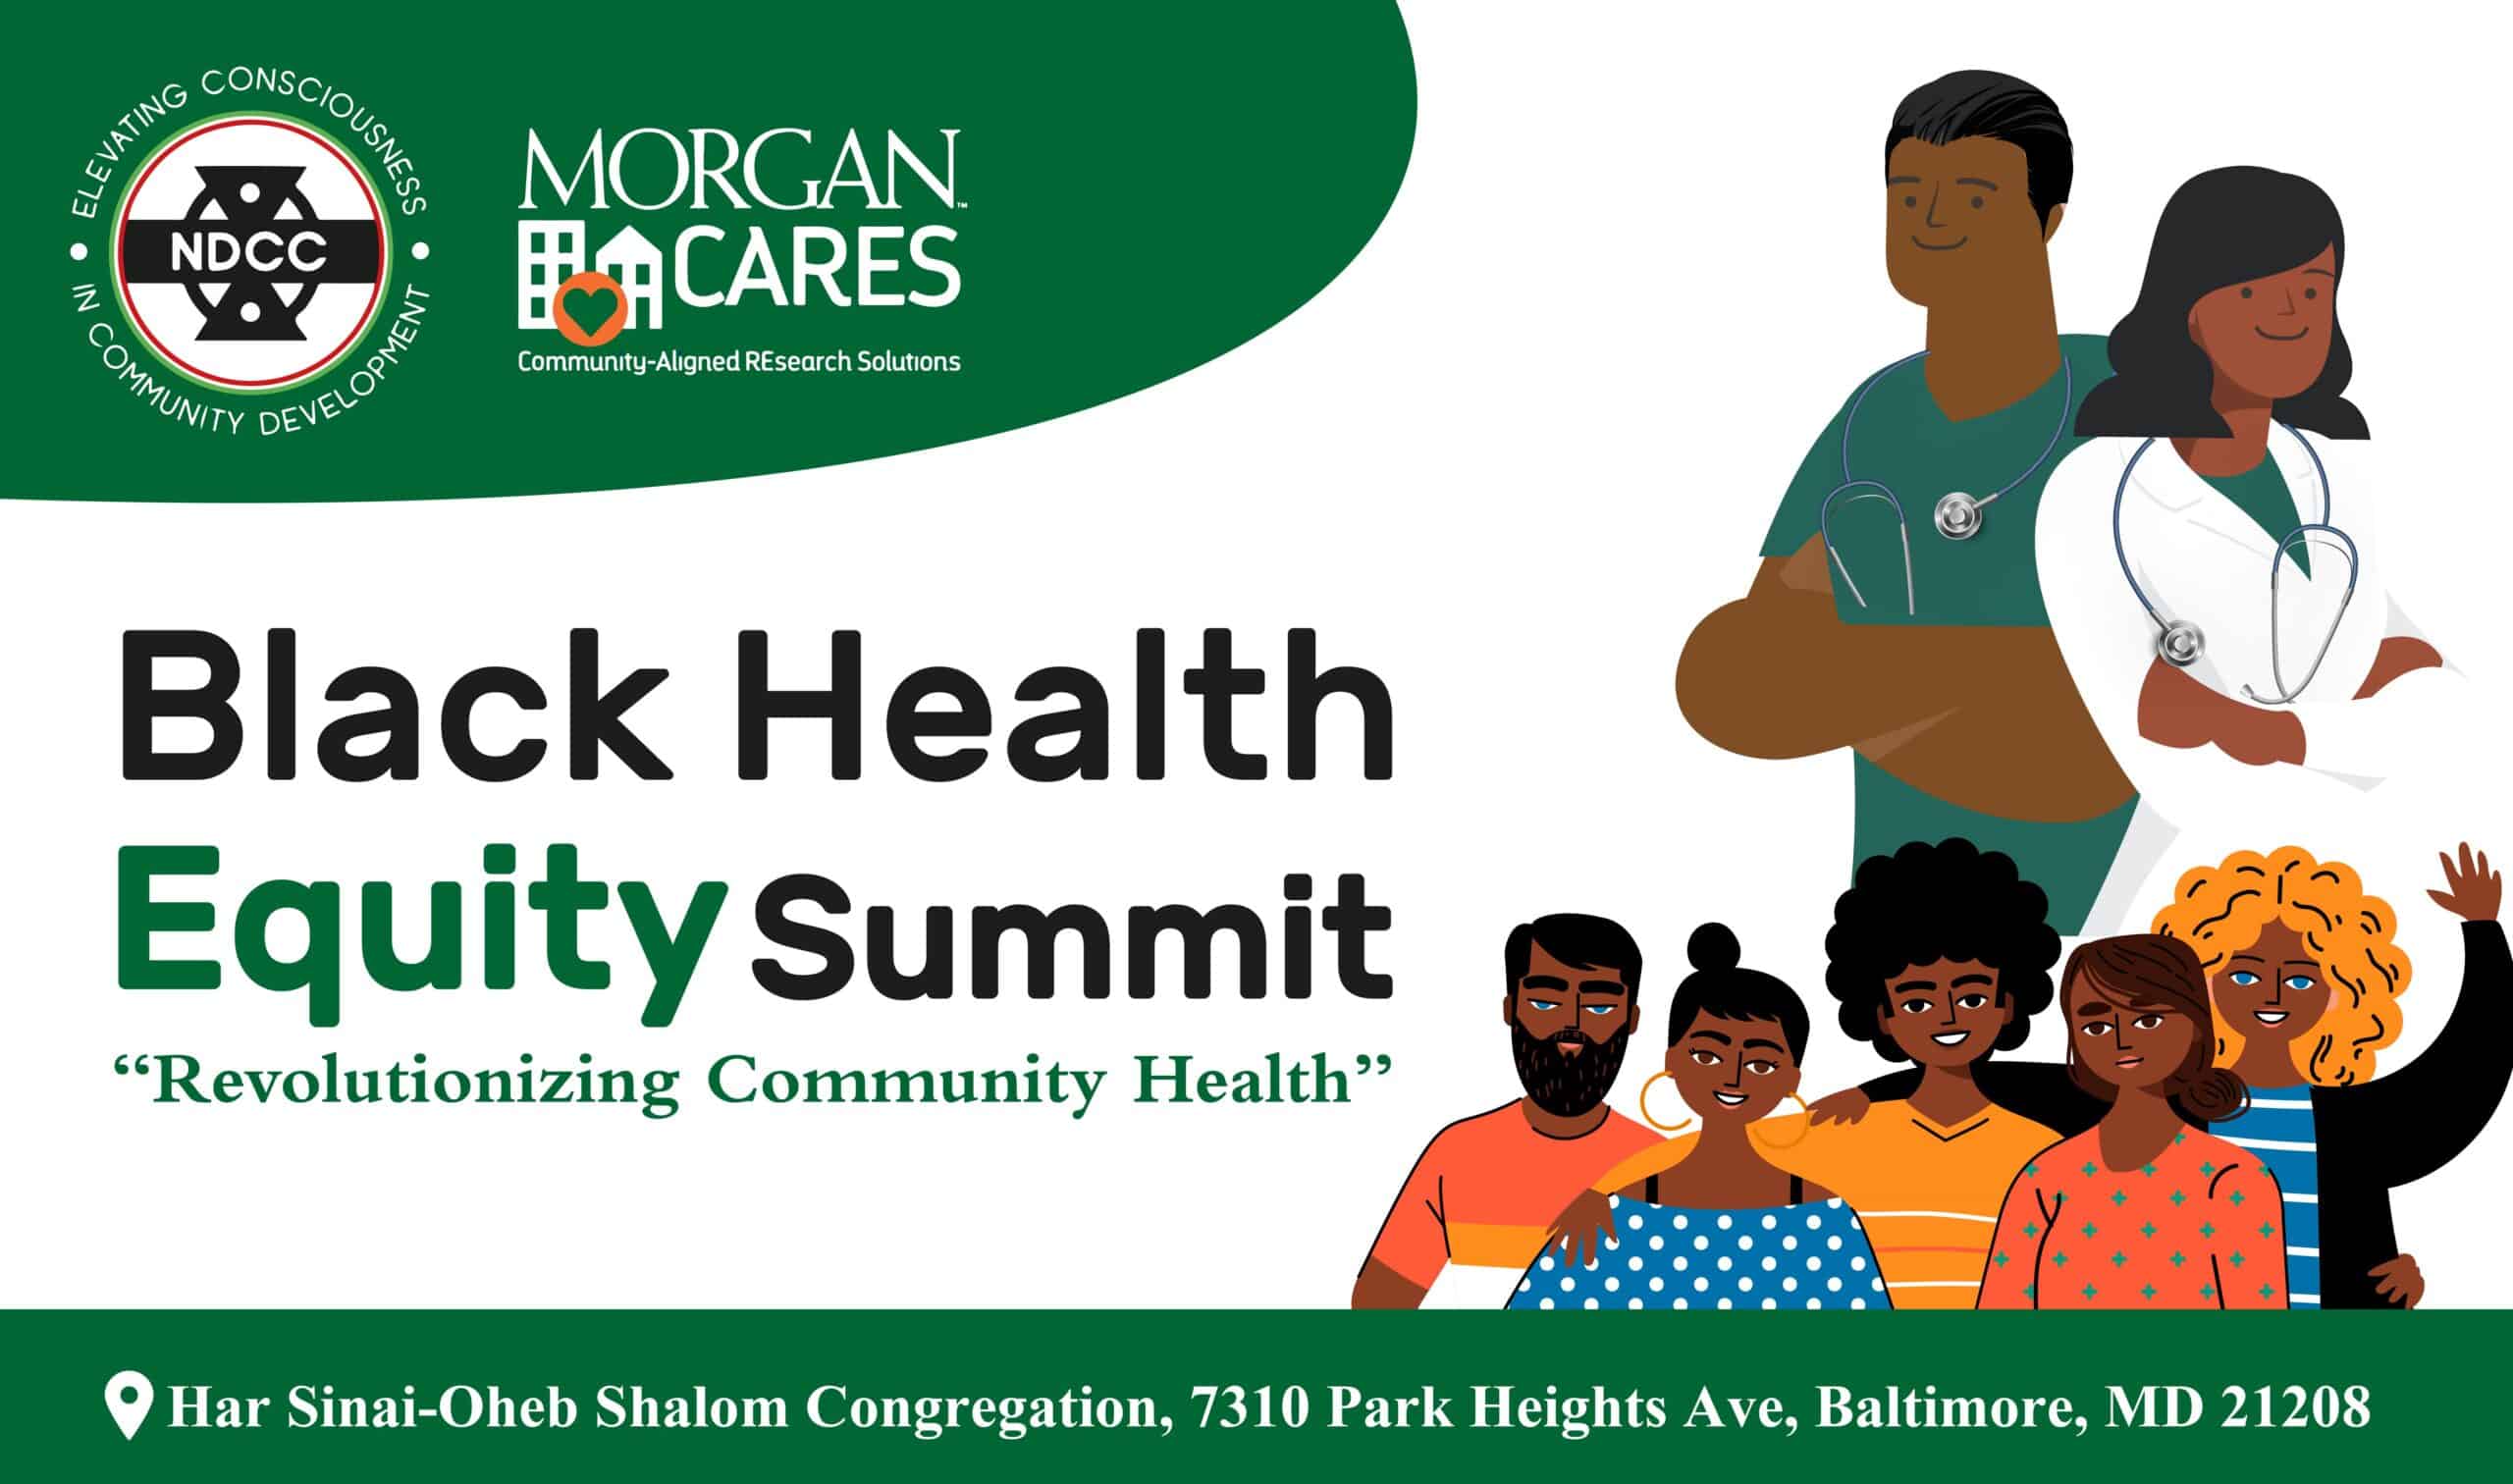 Black Health Equity Summit Network for Developing Conscious Communities